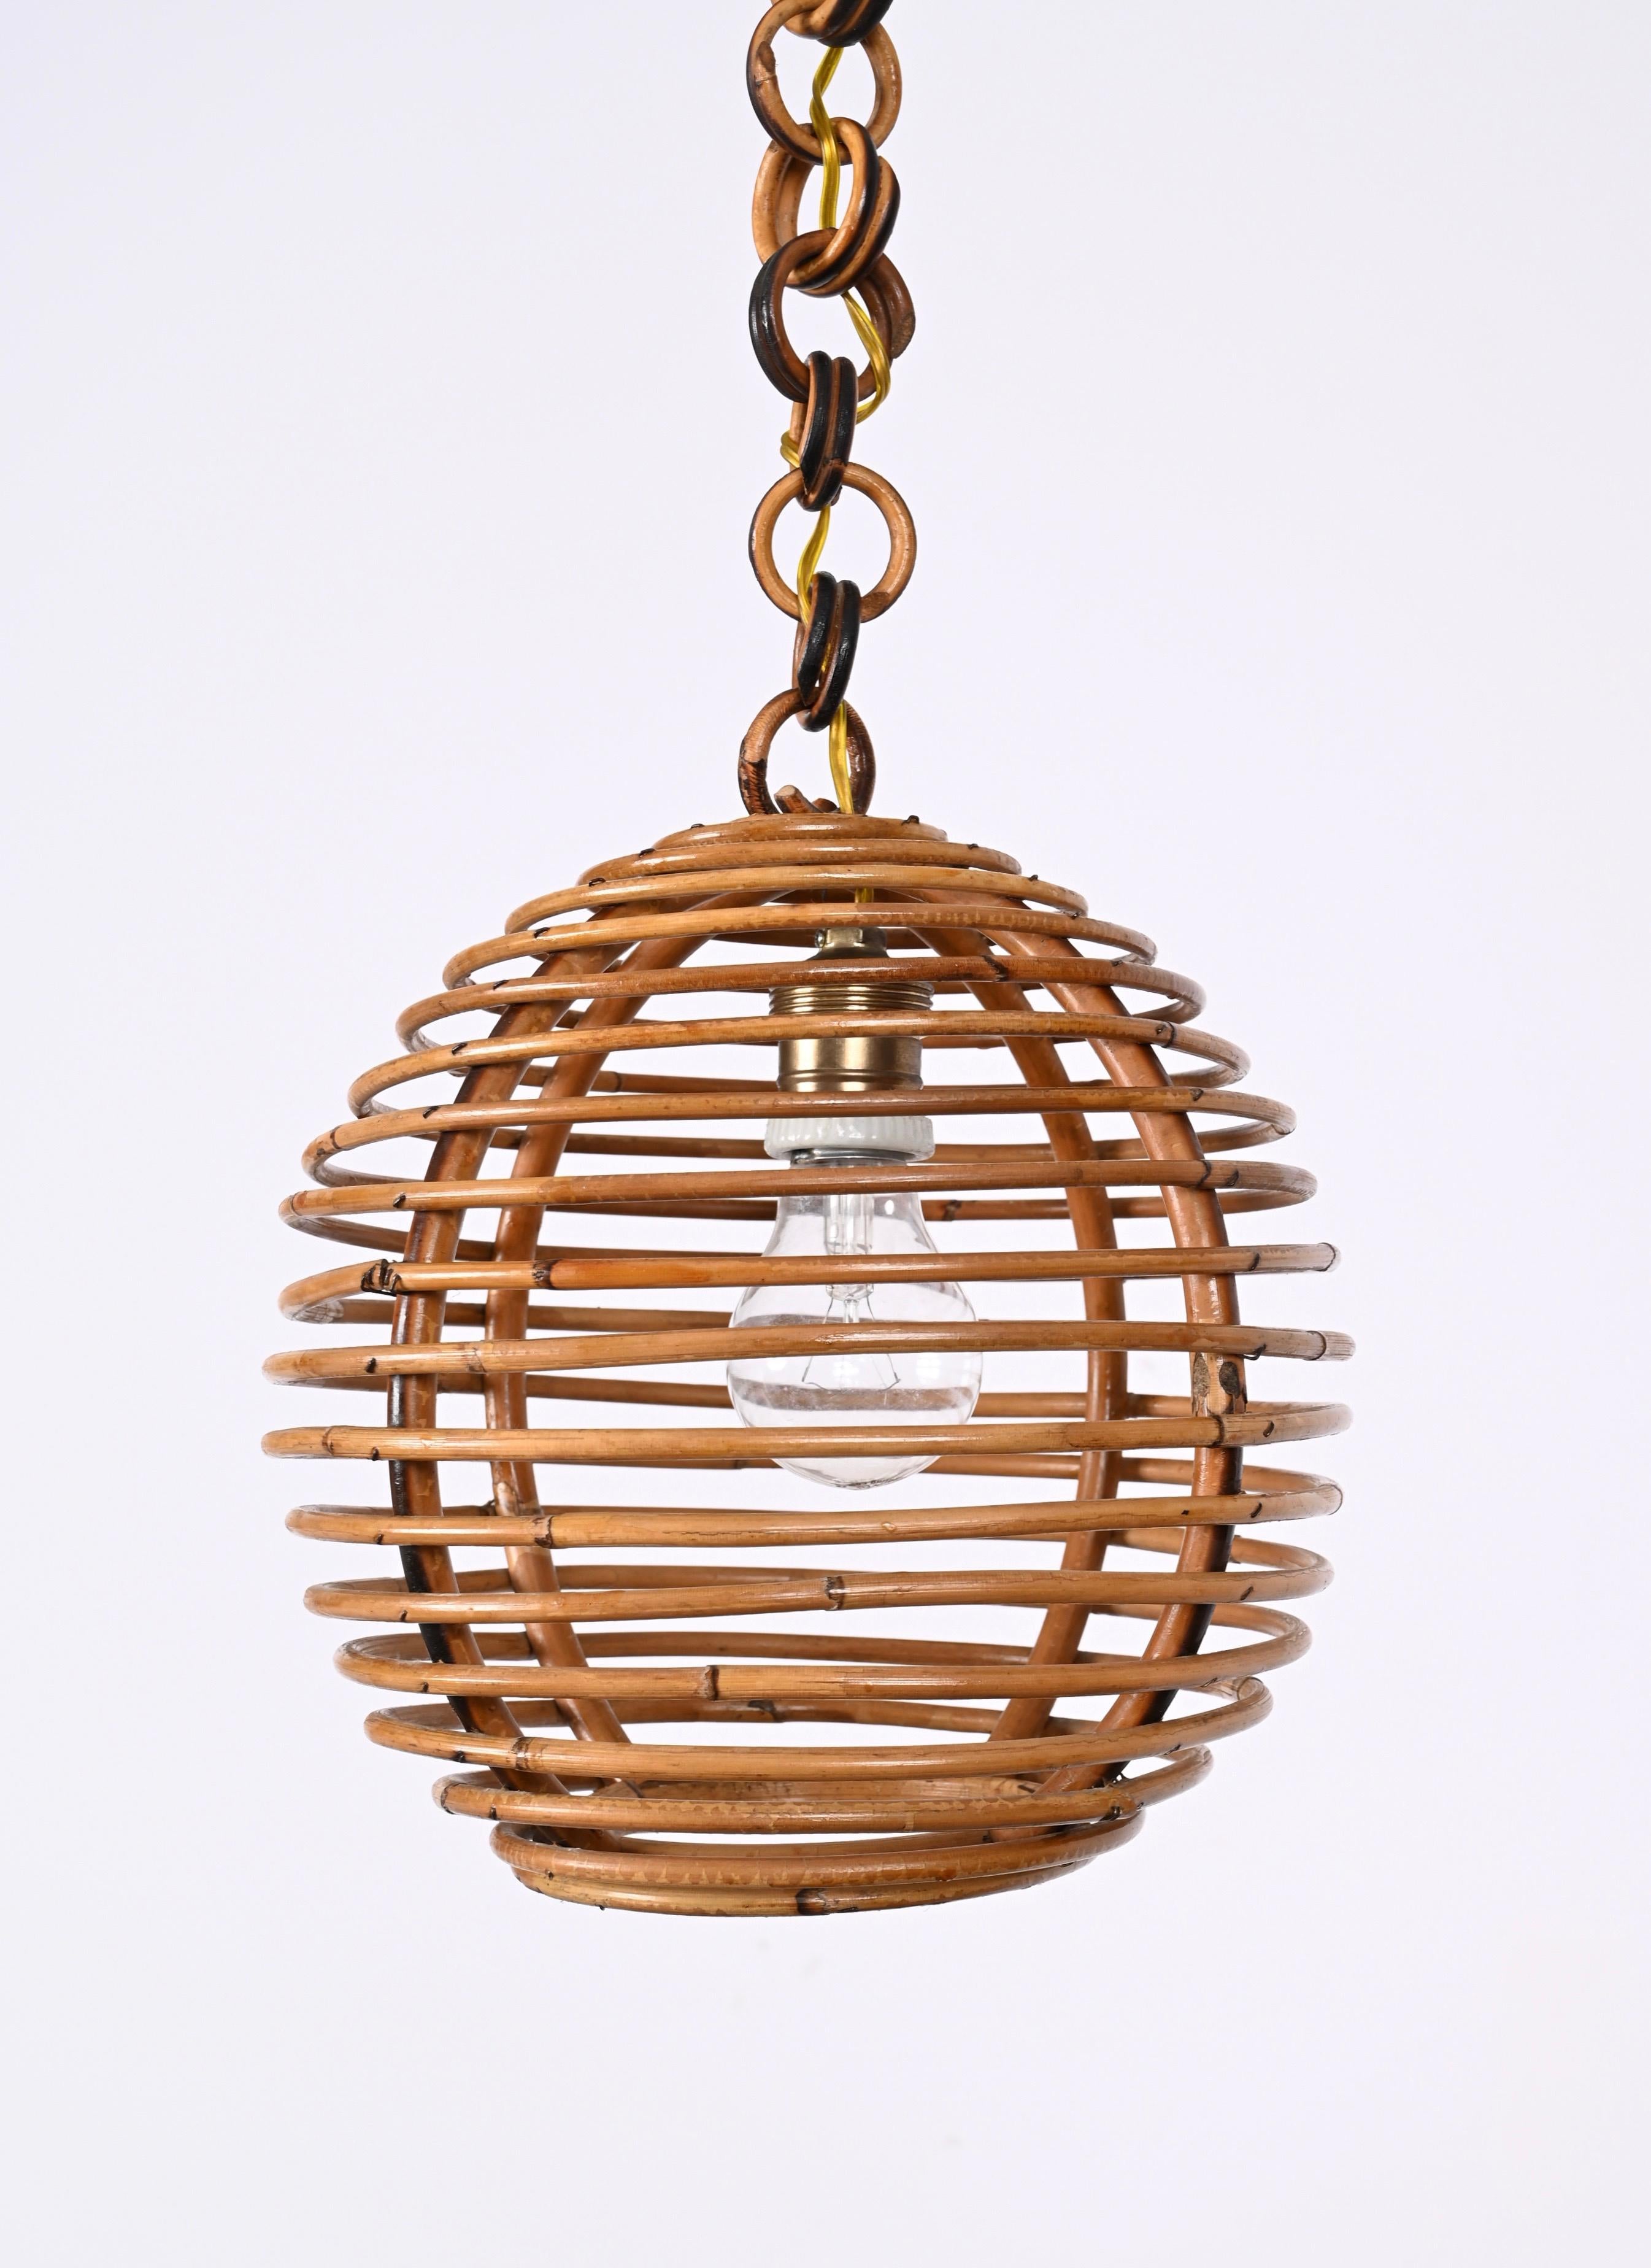 Midcentury French Riviera Bambo and Rattan Spherical Italian Chandelier, 1960s For Sale 7